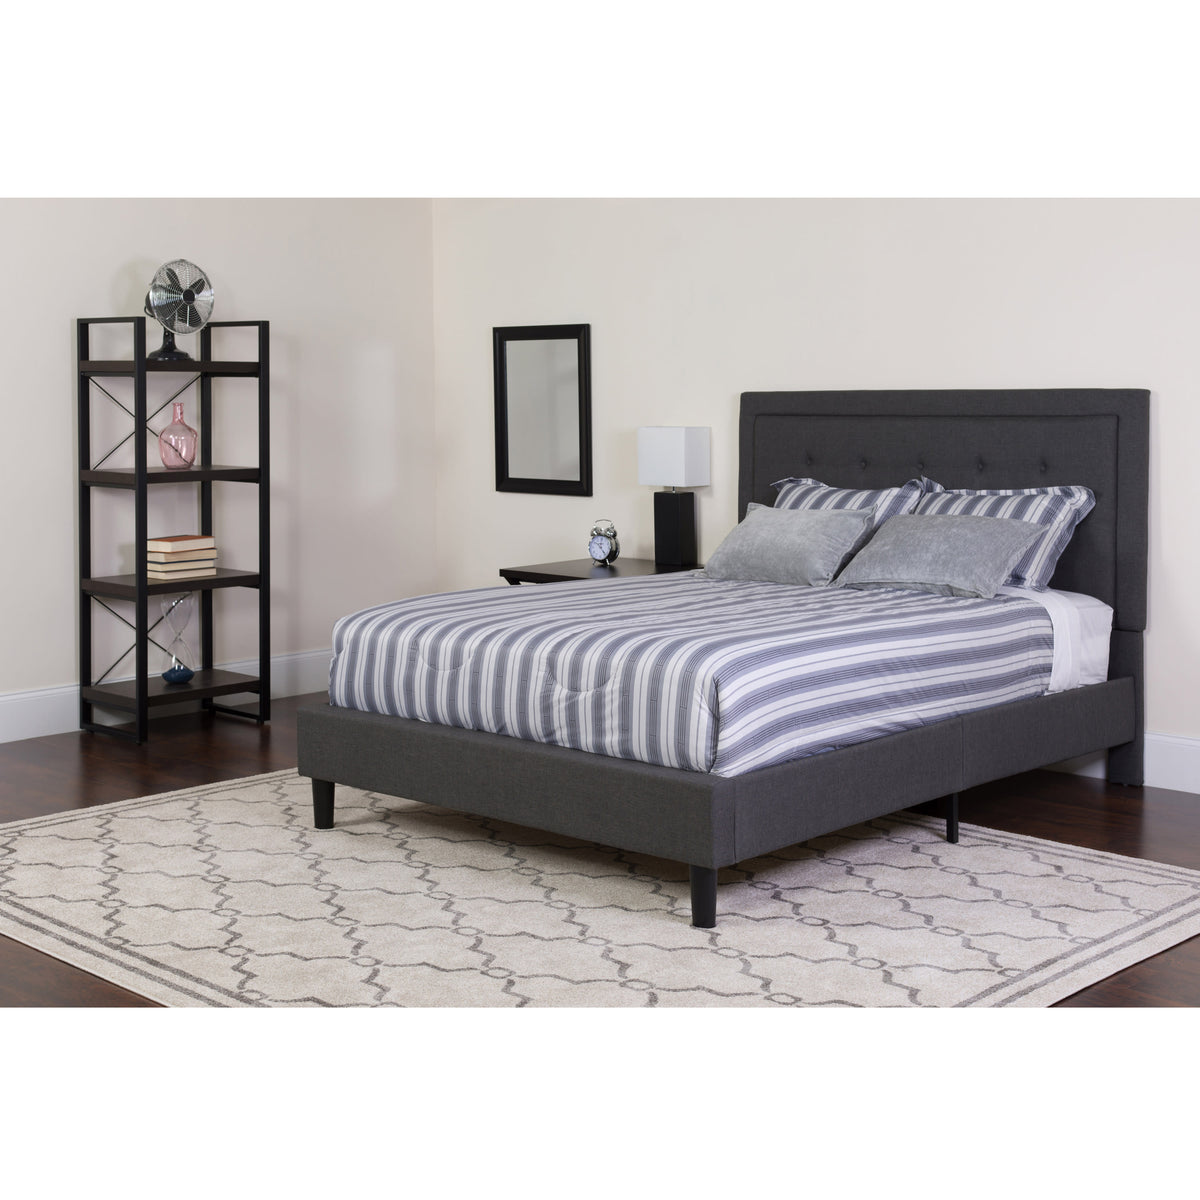 Dark Gray,Twin |#| Twin Size Panel Tufted Dk Gray Fabric Platform Bed with Pocket Spring Mattress